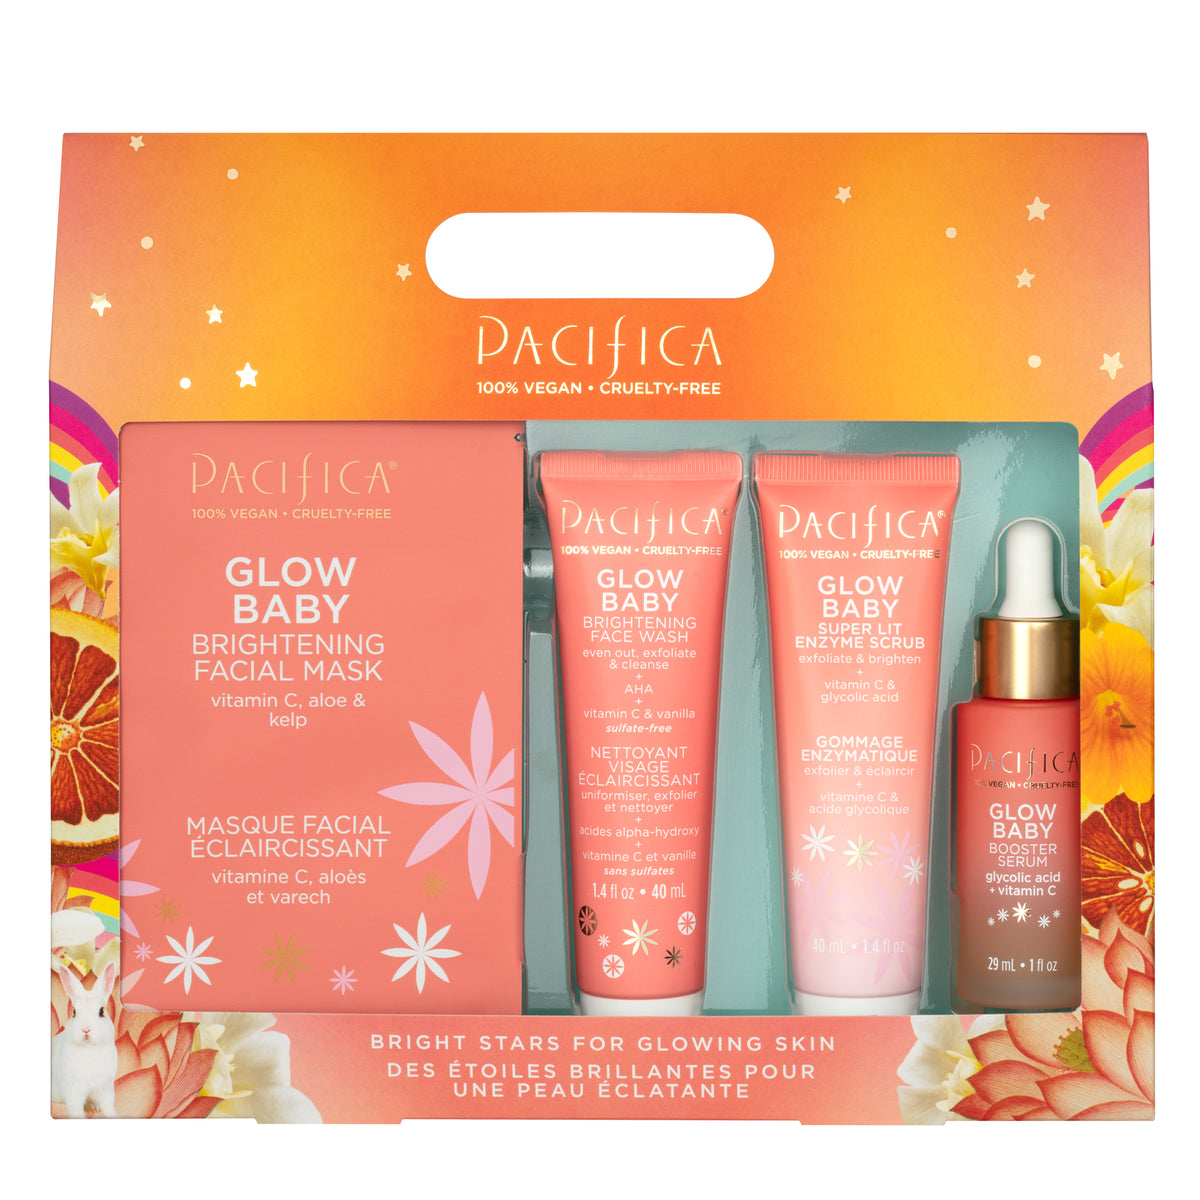 Bright Stars for Glowing Skin Set - Holiday Sets - Pacifica Beauty